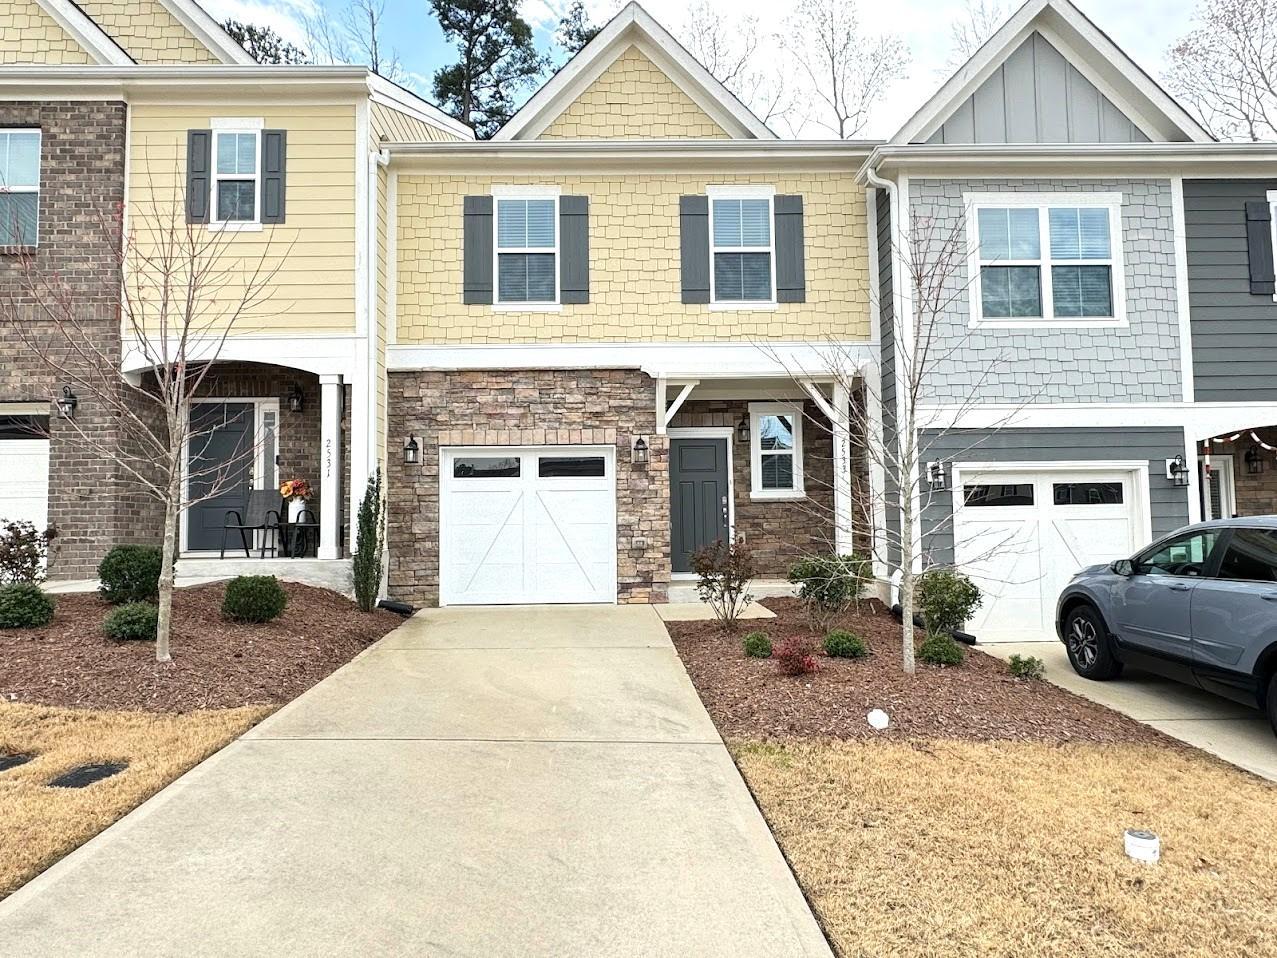 View Apex, NC 27523 townhome